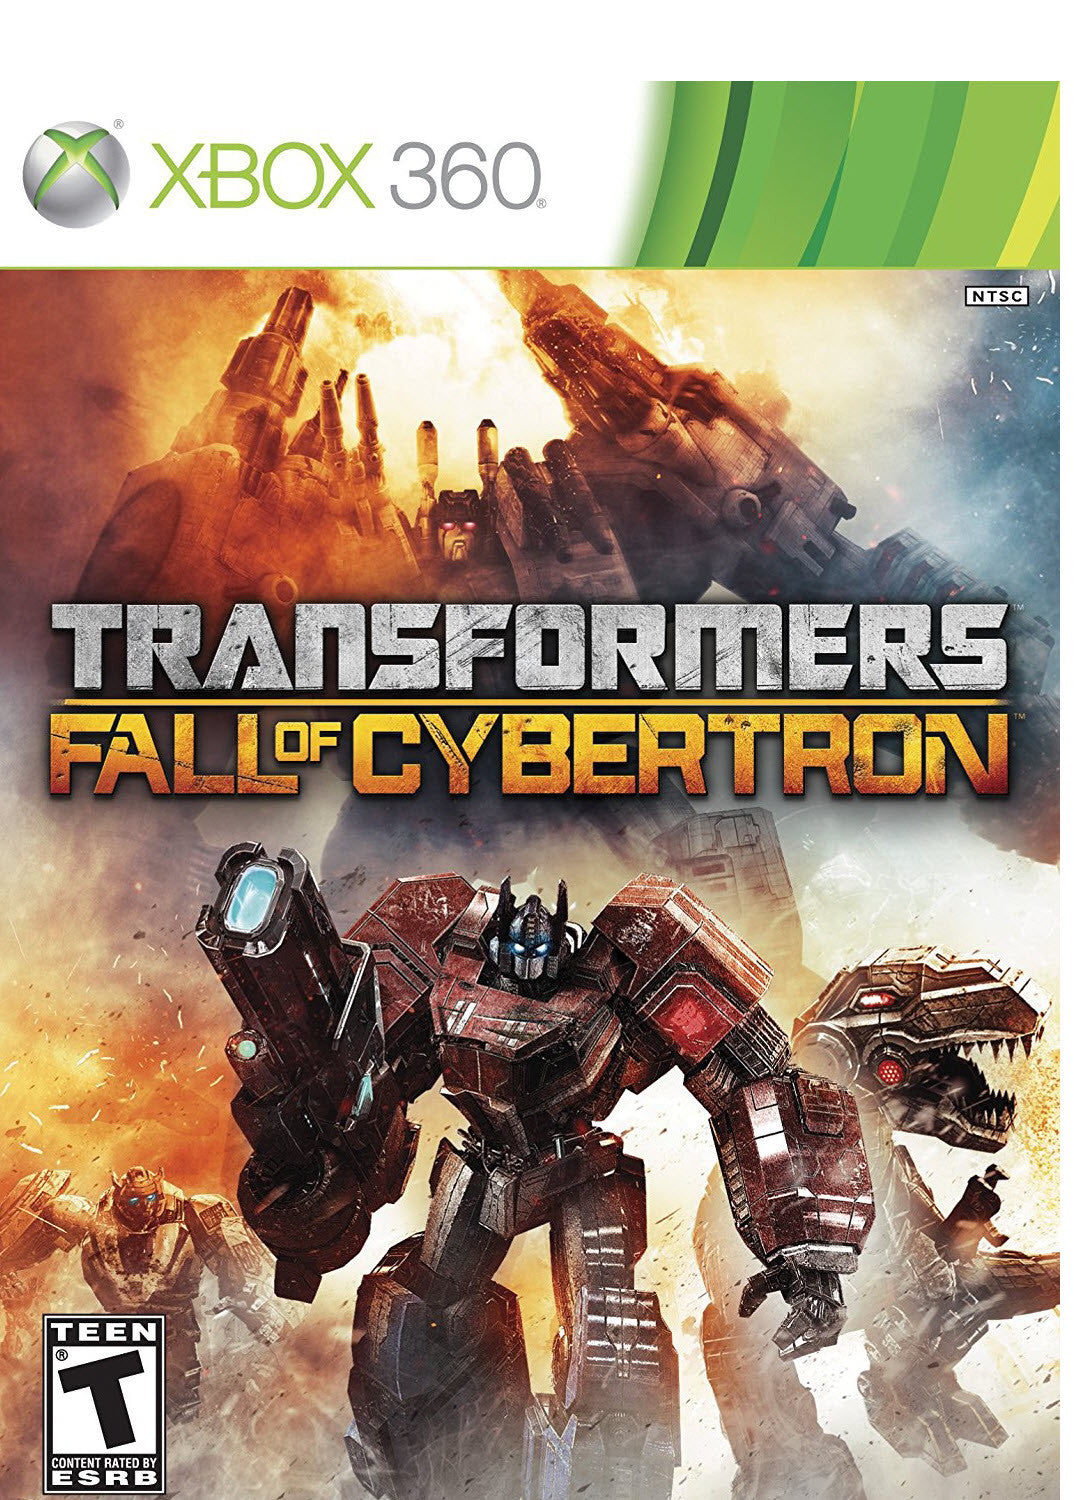 Transformers: Fall of Cybertron - Xbox 360